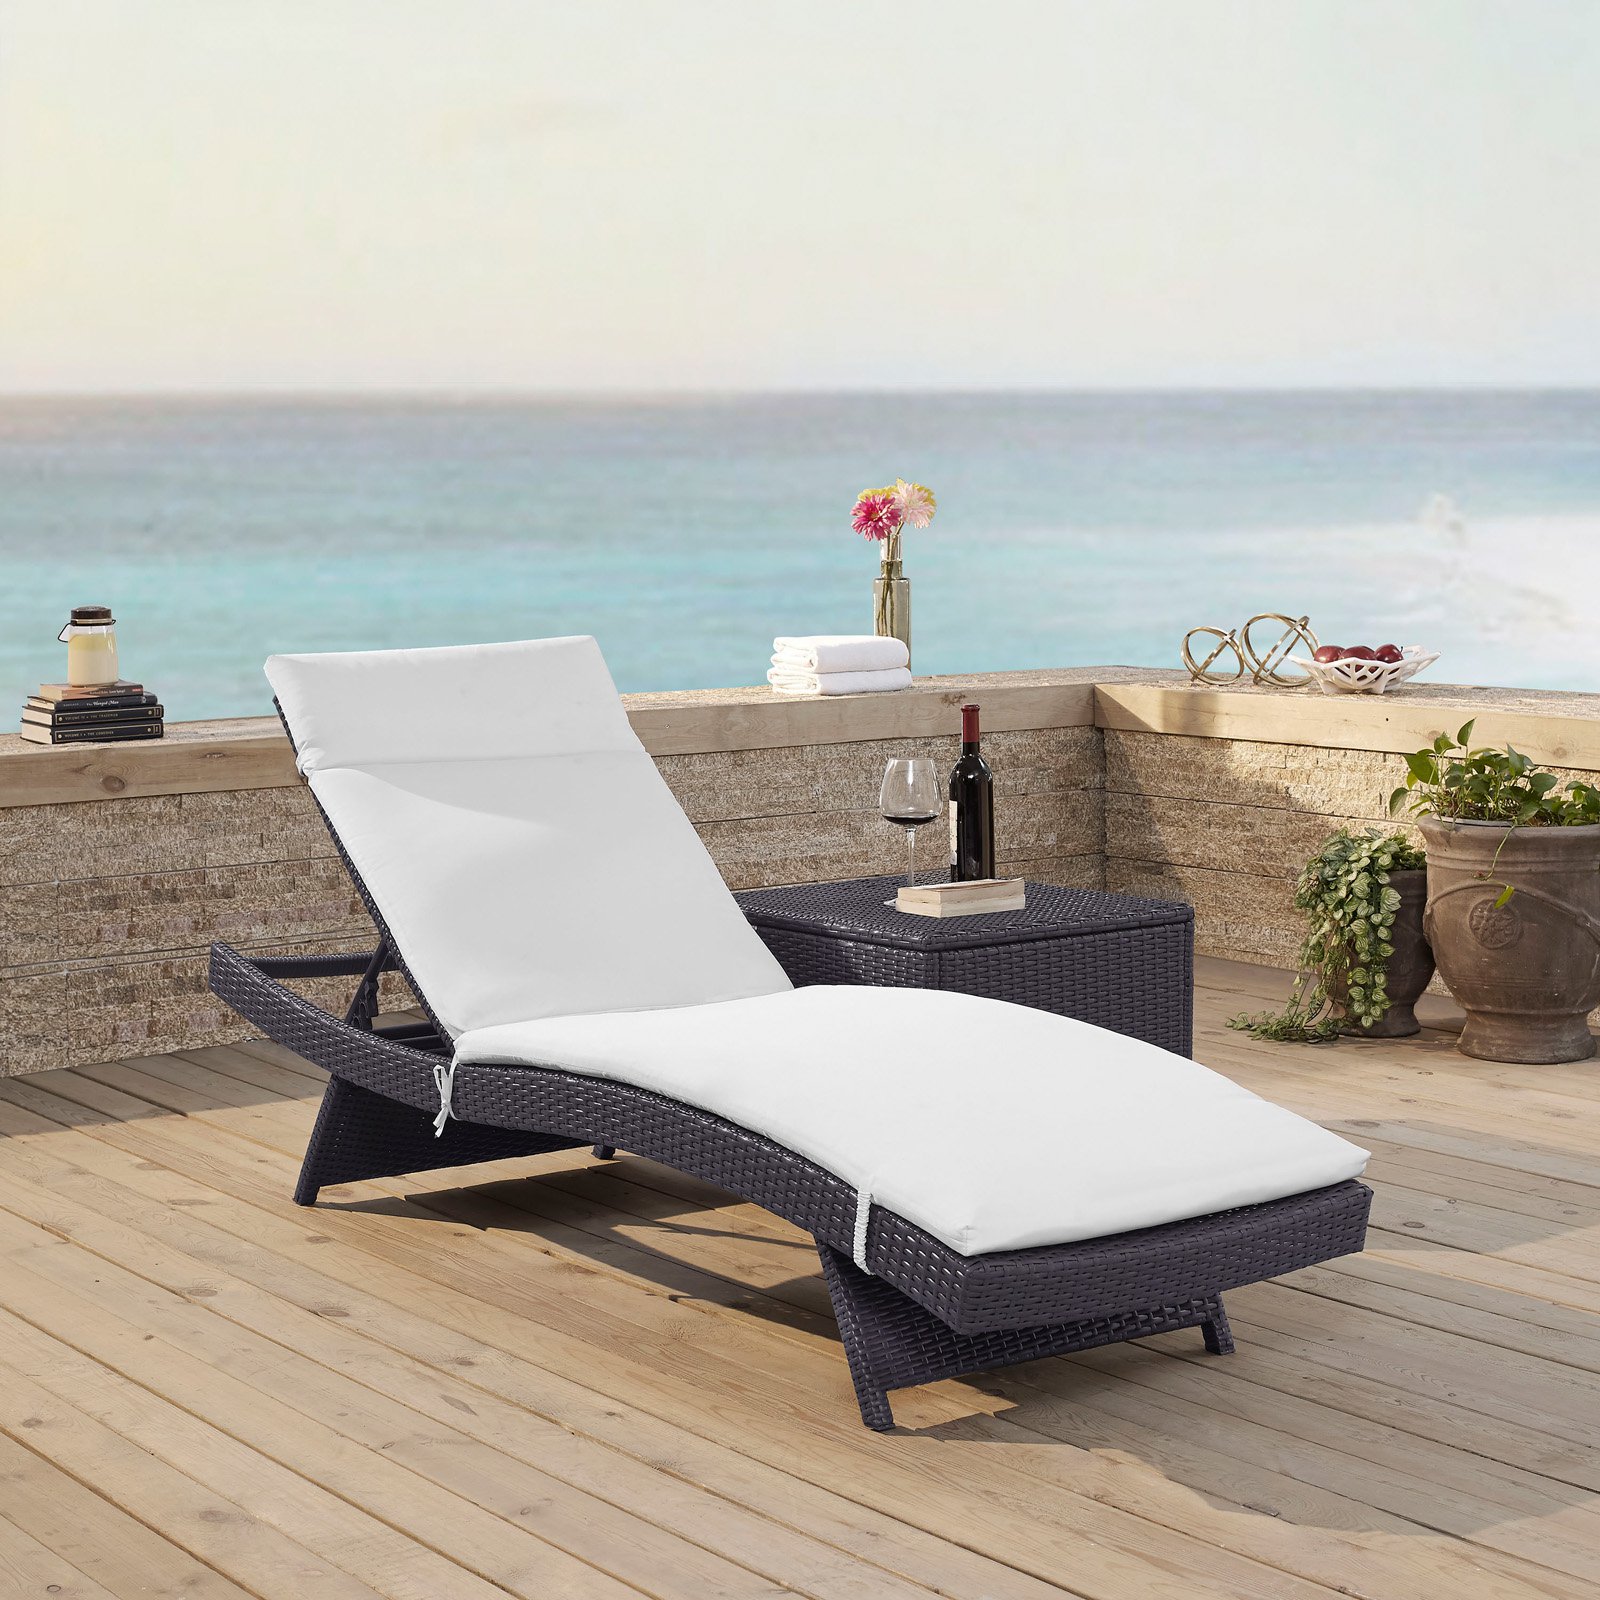 Crosley Biscayne Patio Chaise Lounge in Brown and White - image 1 of 9